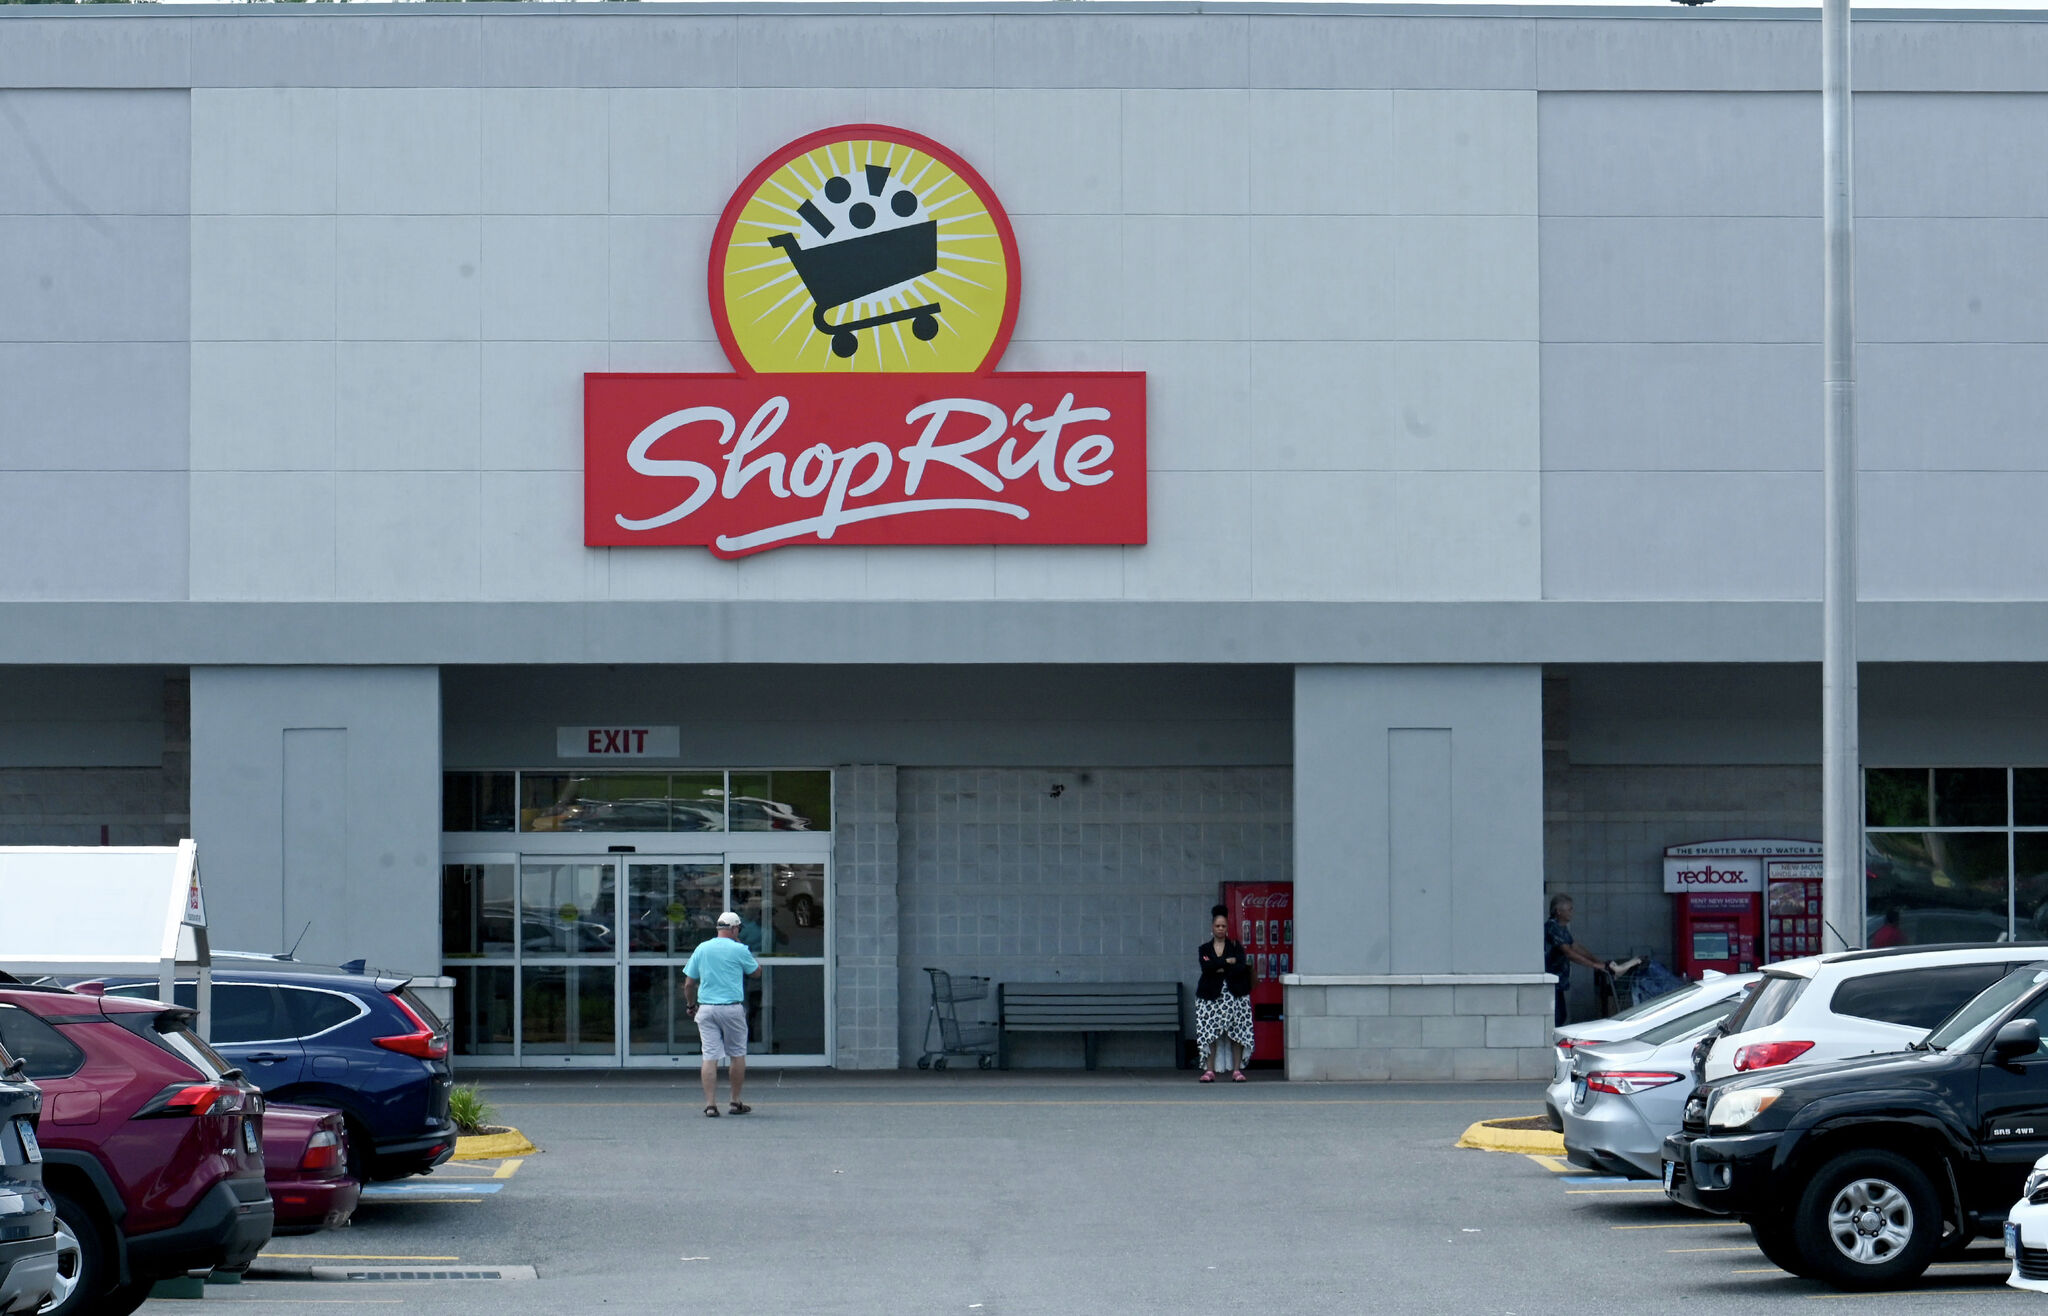 ShopRite: Operations during storm outages